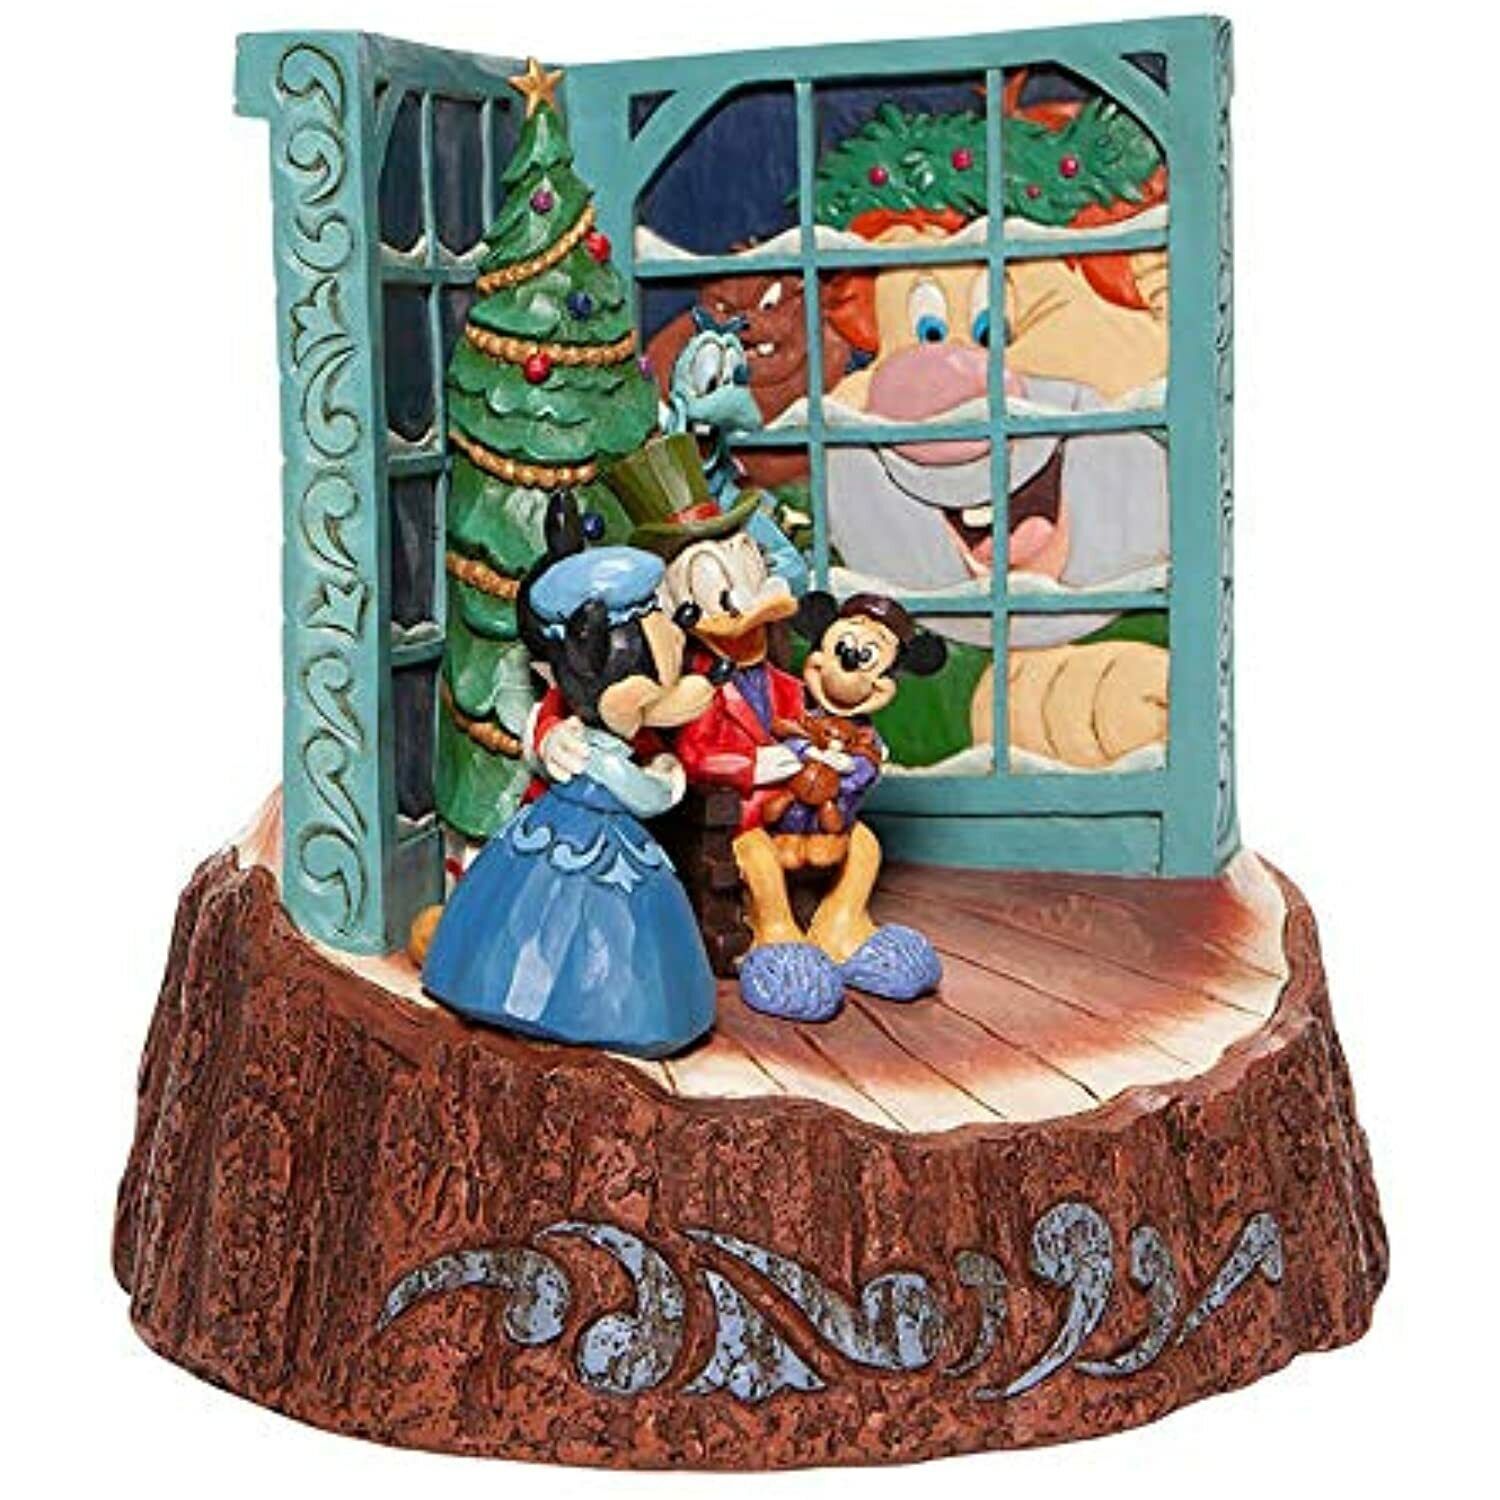 Christmas Carol - Carved By Heart , Mickey Mouse figur, Disney figur, Disney figurer, Minnie Mouse figur, Onkel Joachim figur, Disney Julefigur, Disney Julepynt, Jim Shore Figur, Carved by Heart figur, 6007060, Disney figur, Disney figurer, alle Disney figurer, eventyrfigur, eventyrfigurer, eventyrlig figur, eventyrlige figurer, magisk figur, magiske figurer, Disney shop, Disney butik, Disney butikDK, Disney butik I Danmark